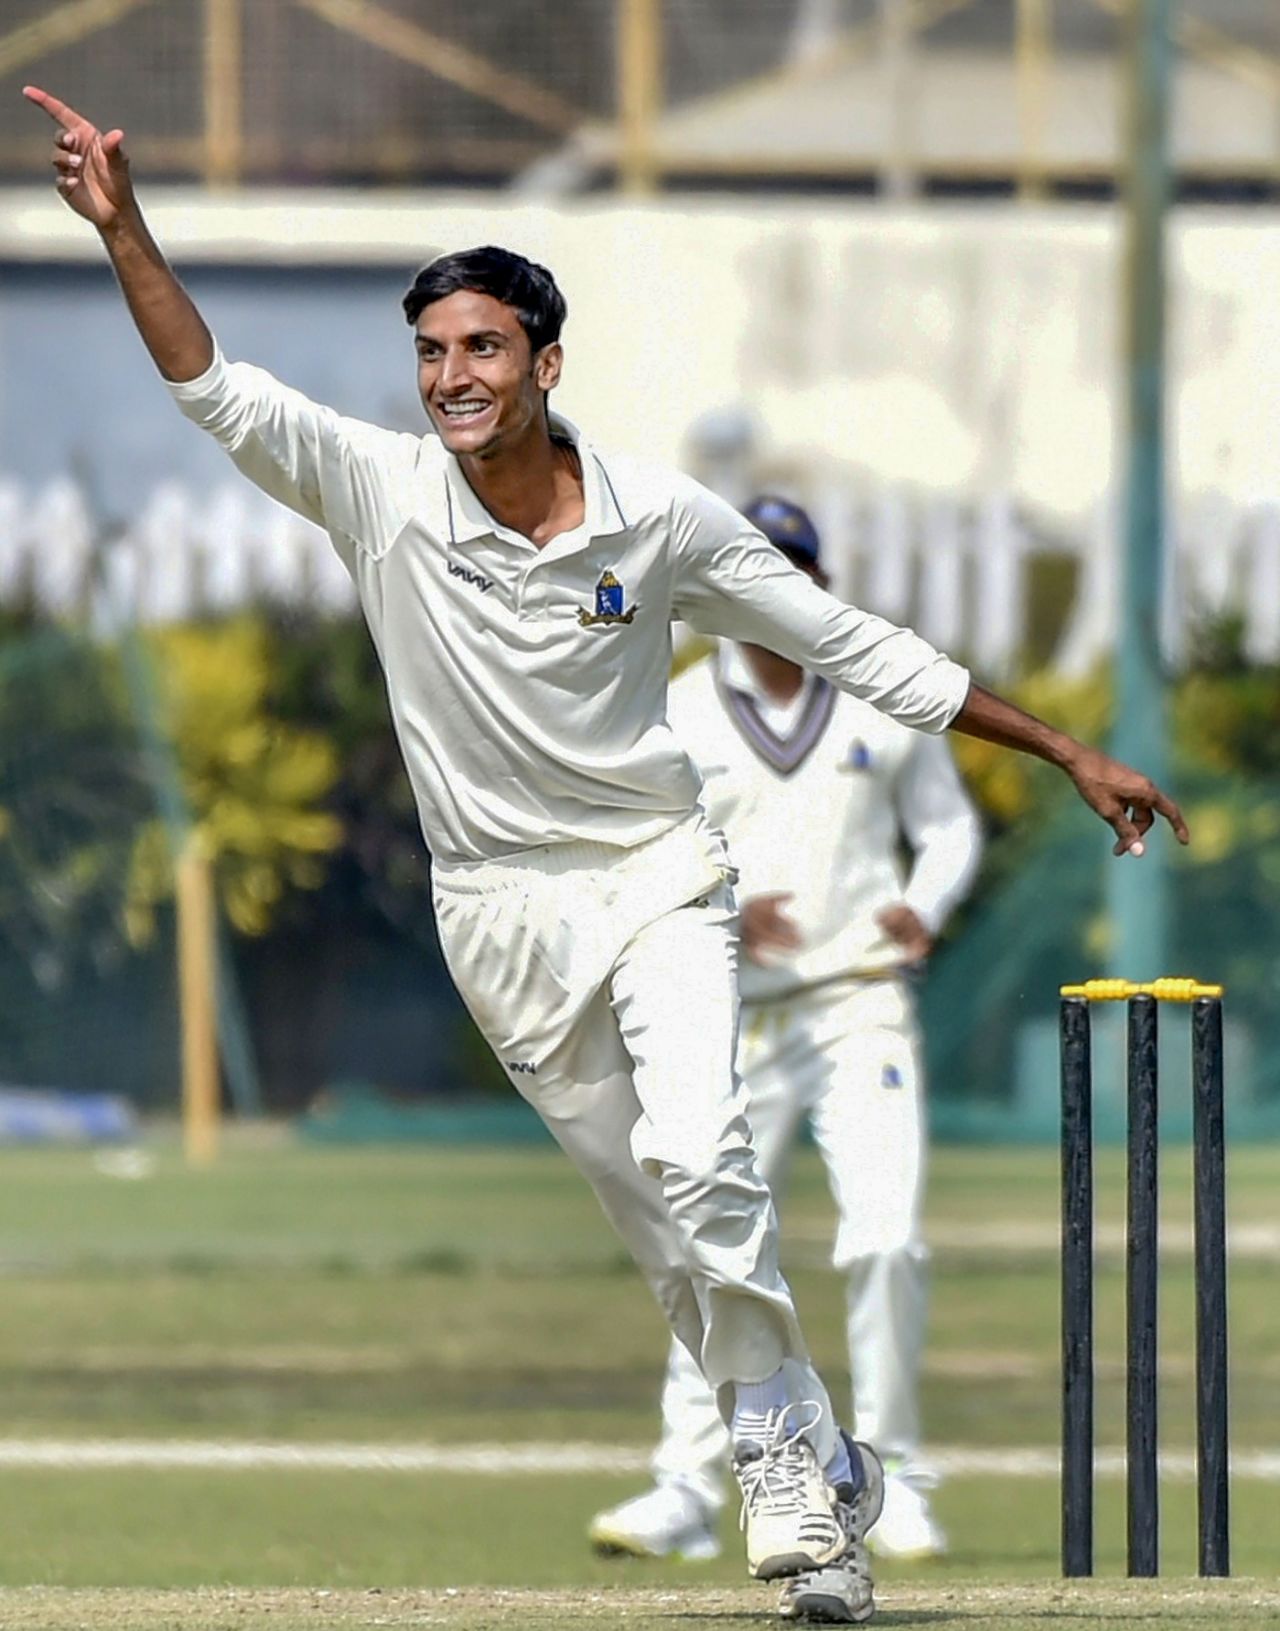 Shahbaz Ahmed claimed a hat-trick for Bengal, Bengal v Hyderabad, Kalyani, Ranji Trophy 2019-20, January 22, 2020